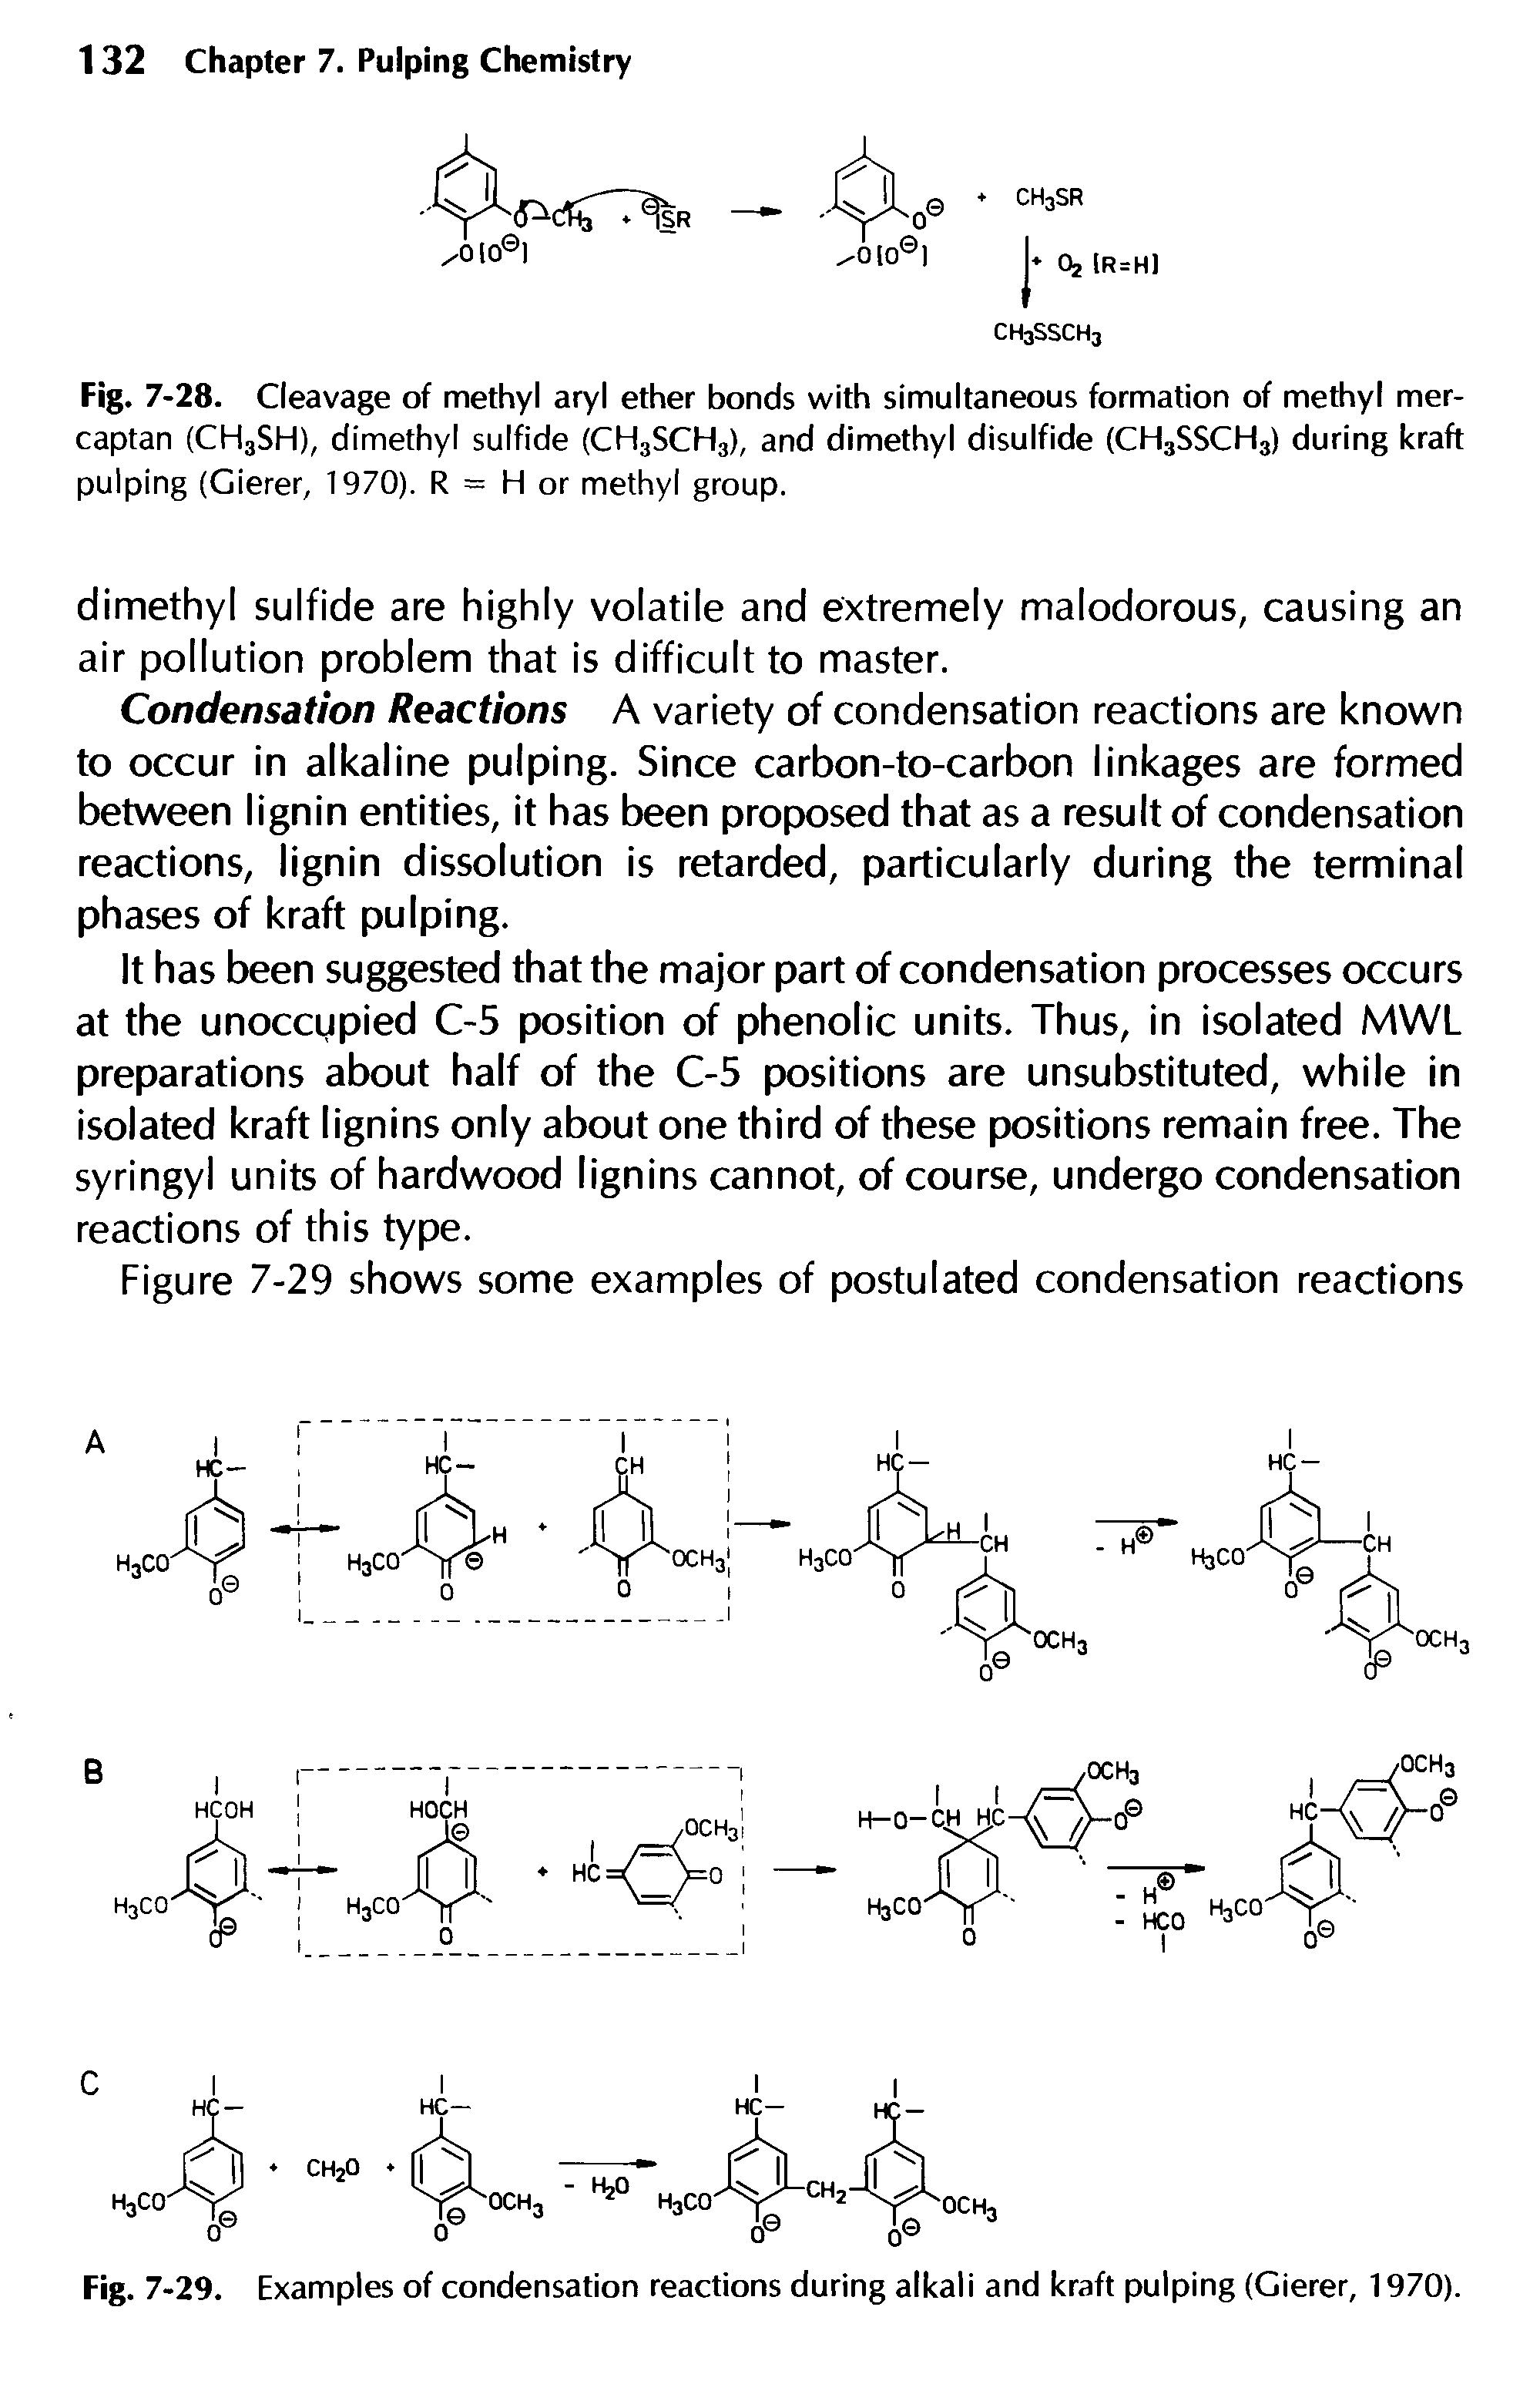 Fig. 7 -29. Examples of condensation reactions during alkali and kraft pulping (Gierer, 1970).